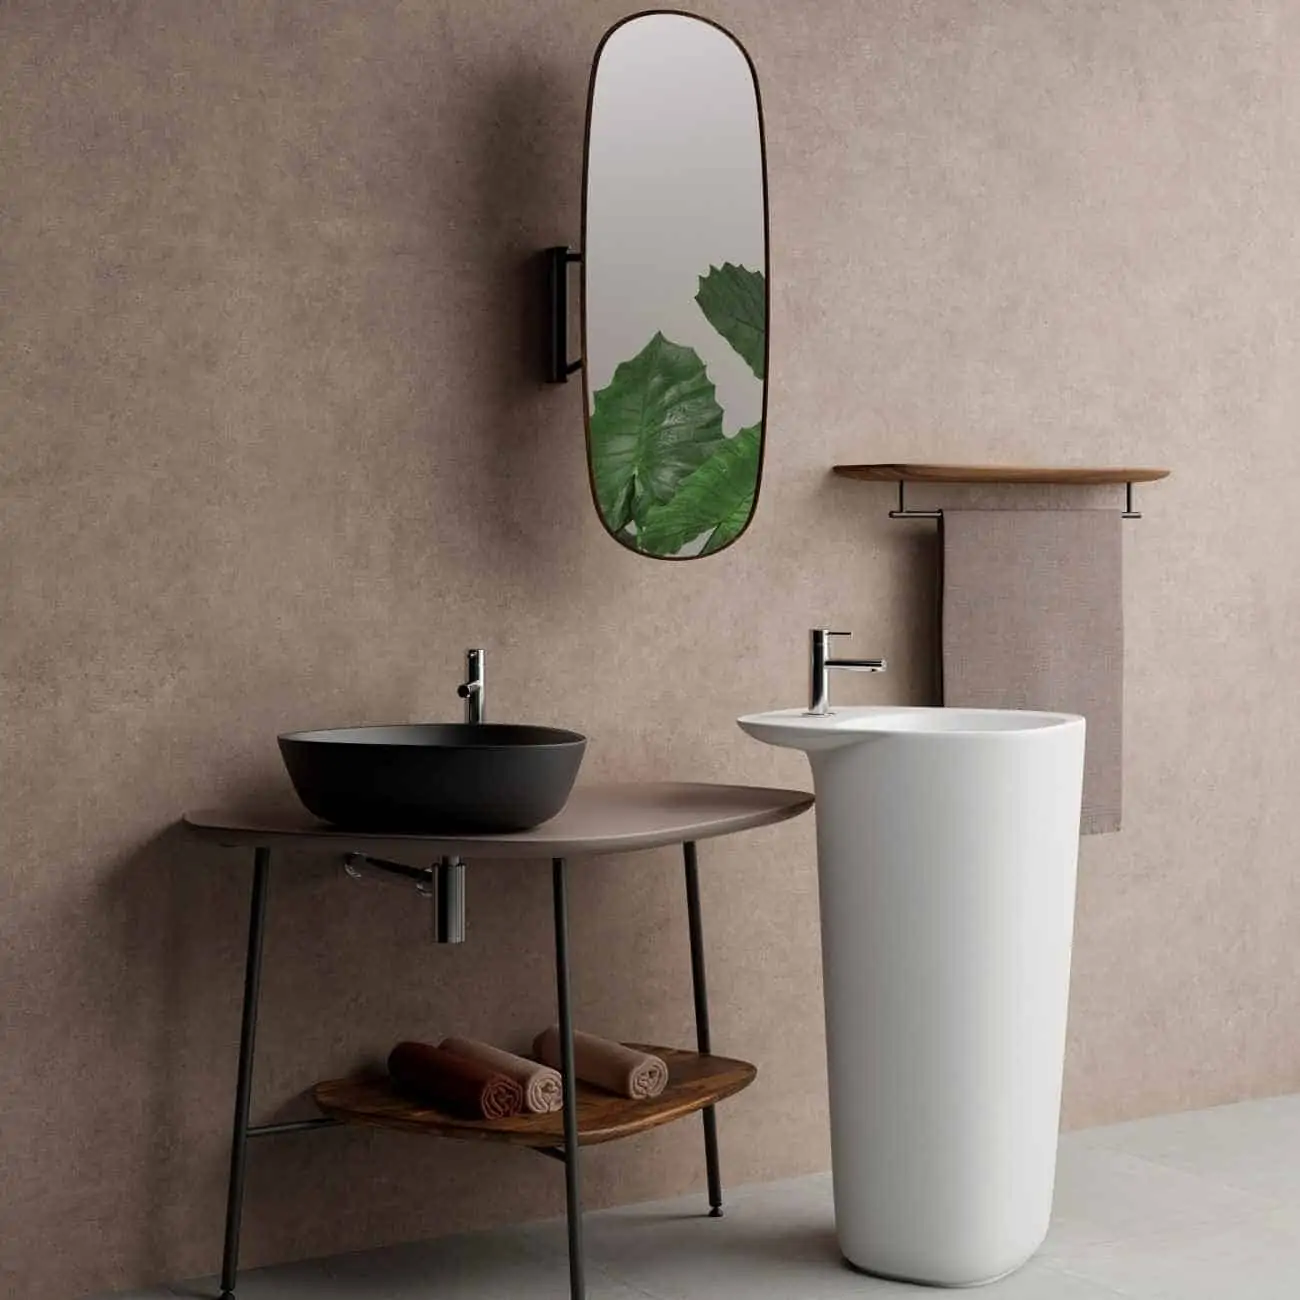 sink in a bathroom in black and white with a mirror